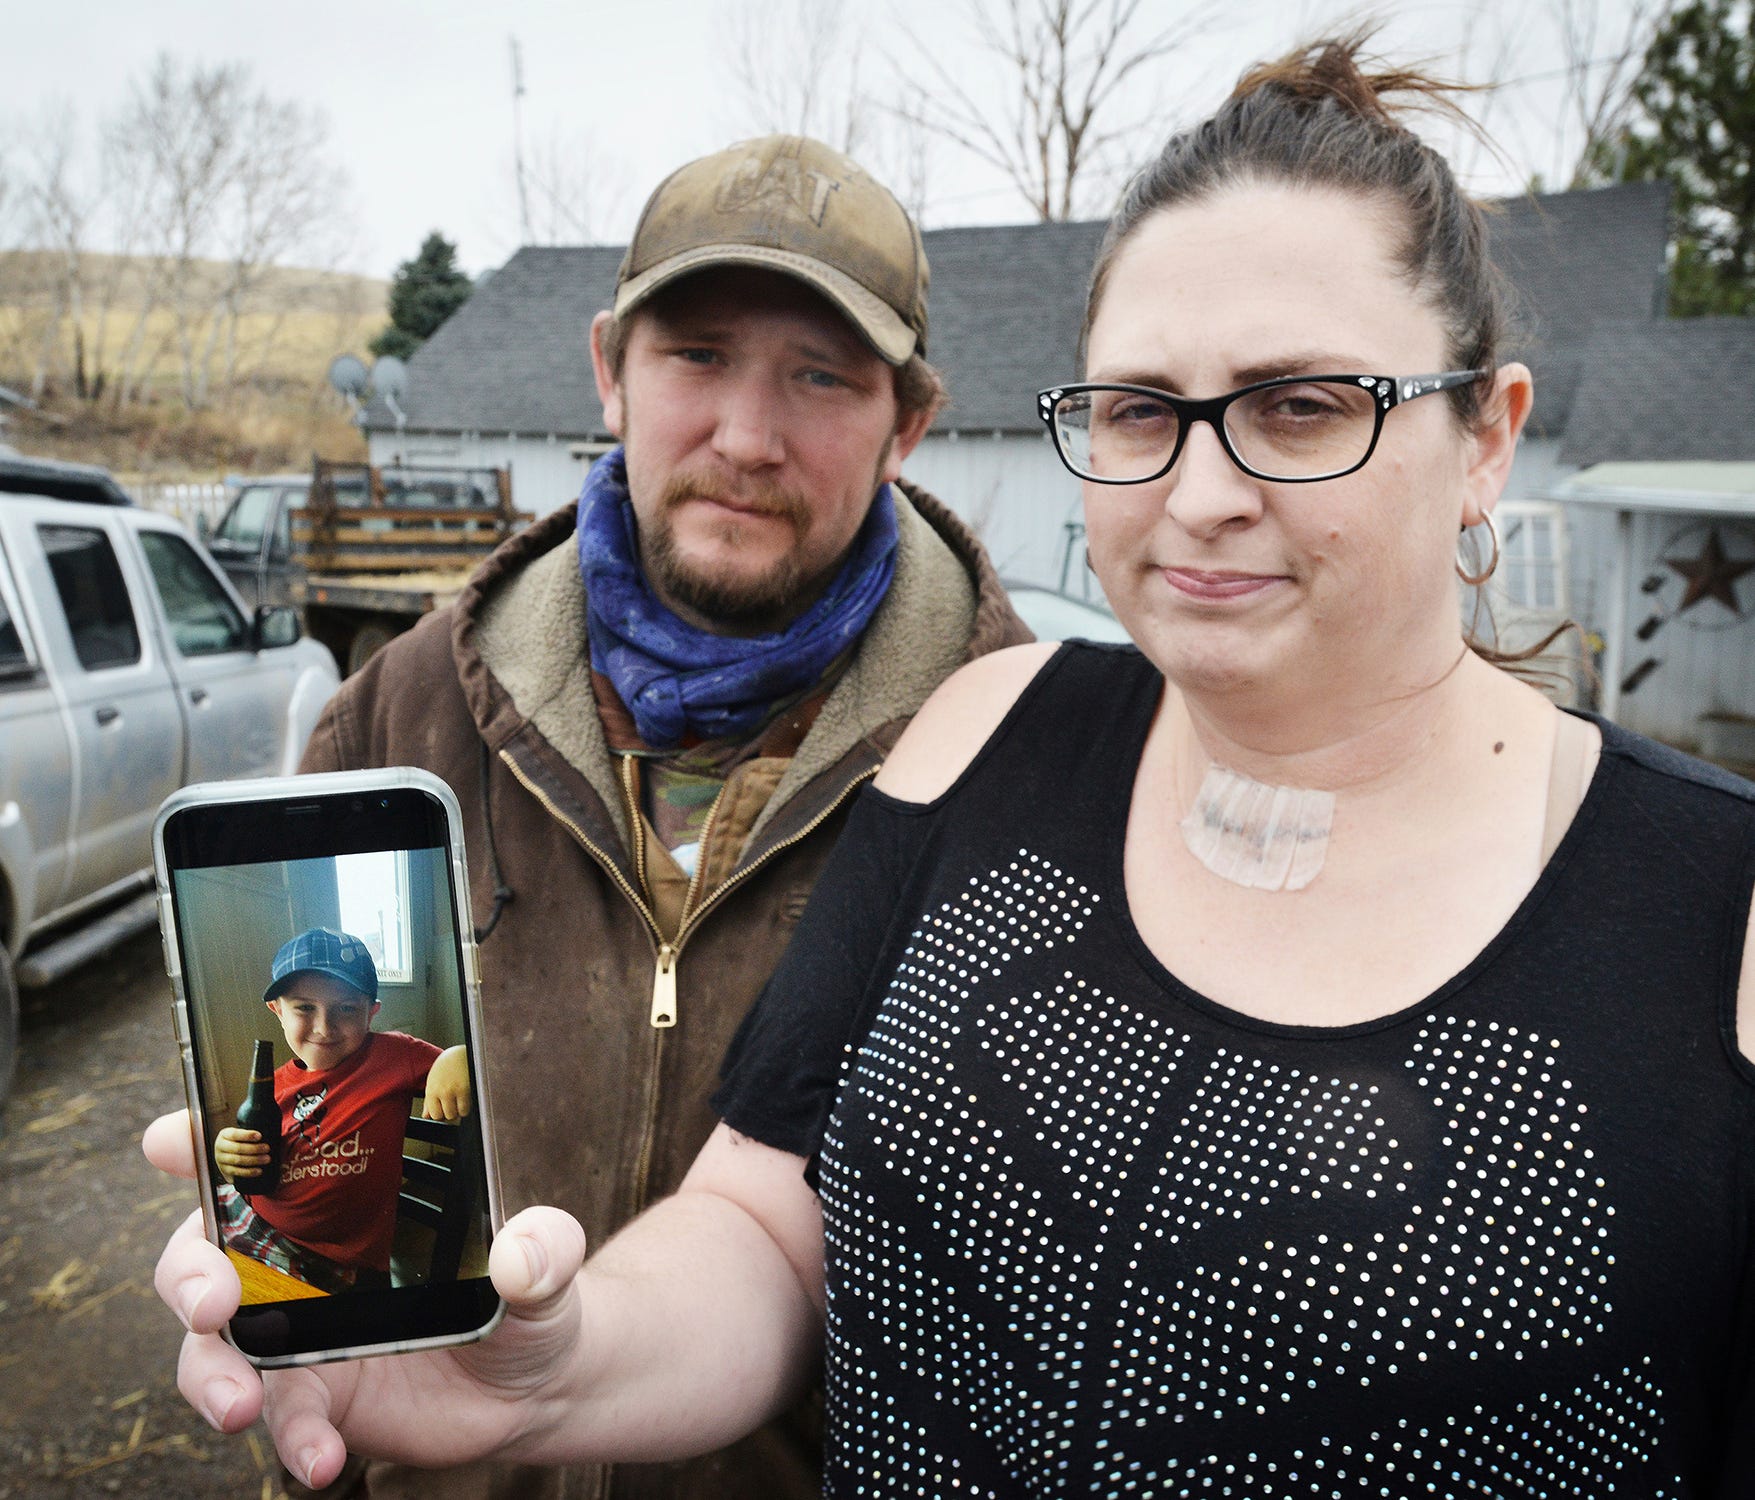 Scott Hinkle, left, and Sara Hebard, both of Pilot Rock, Oregon, lost their son, Liam Flanagan, 8, pictured in the cell phone photo, on Saturday, Jan. 21, 2018, after an eight-day battle with a flesh-eating bacteria.